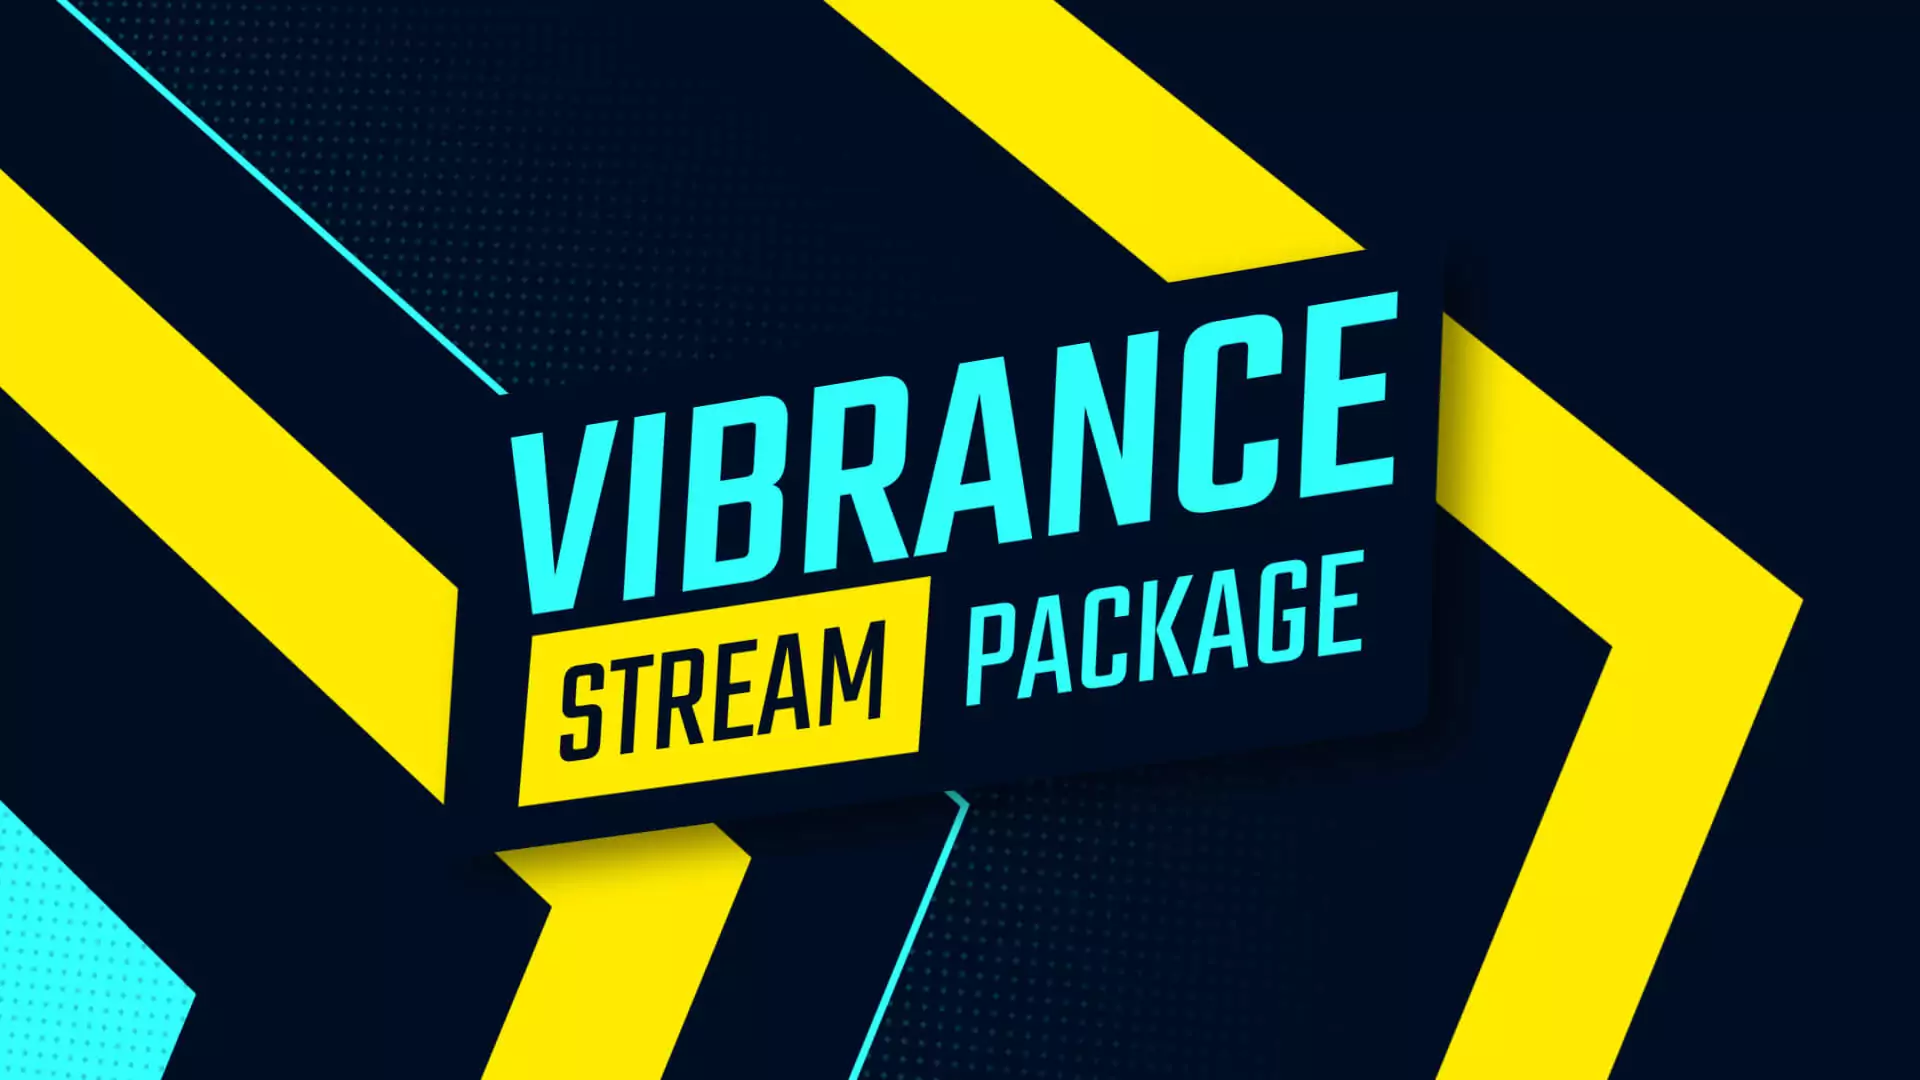 Vibrance Stream Package